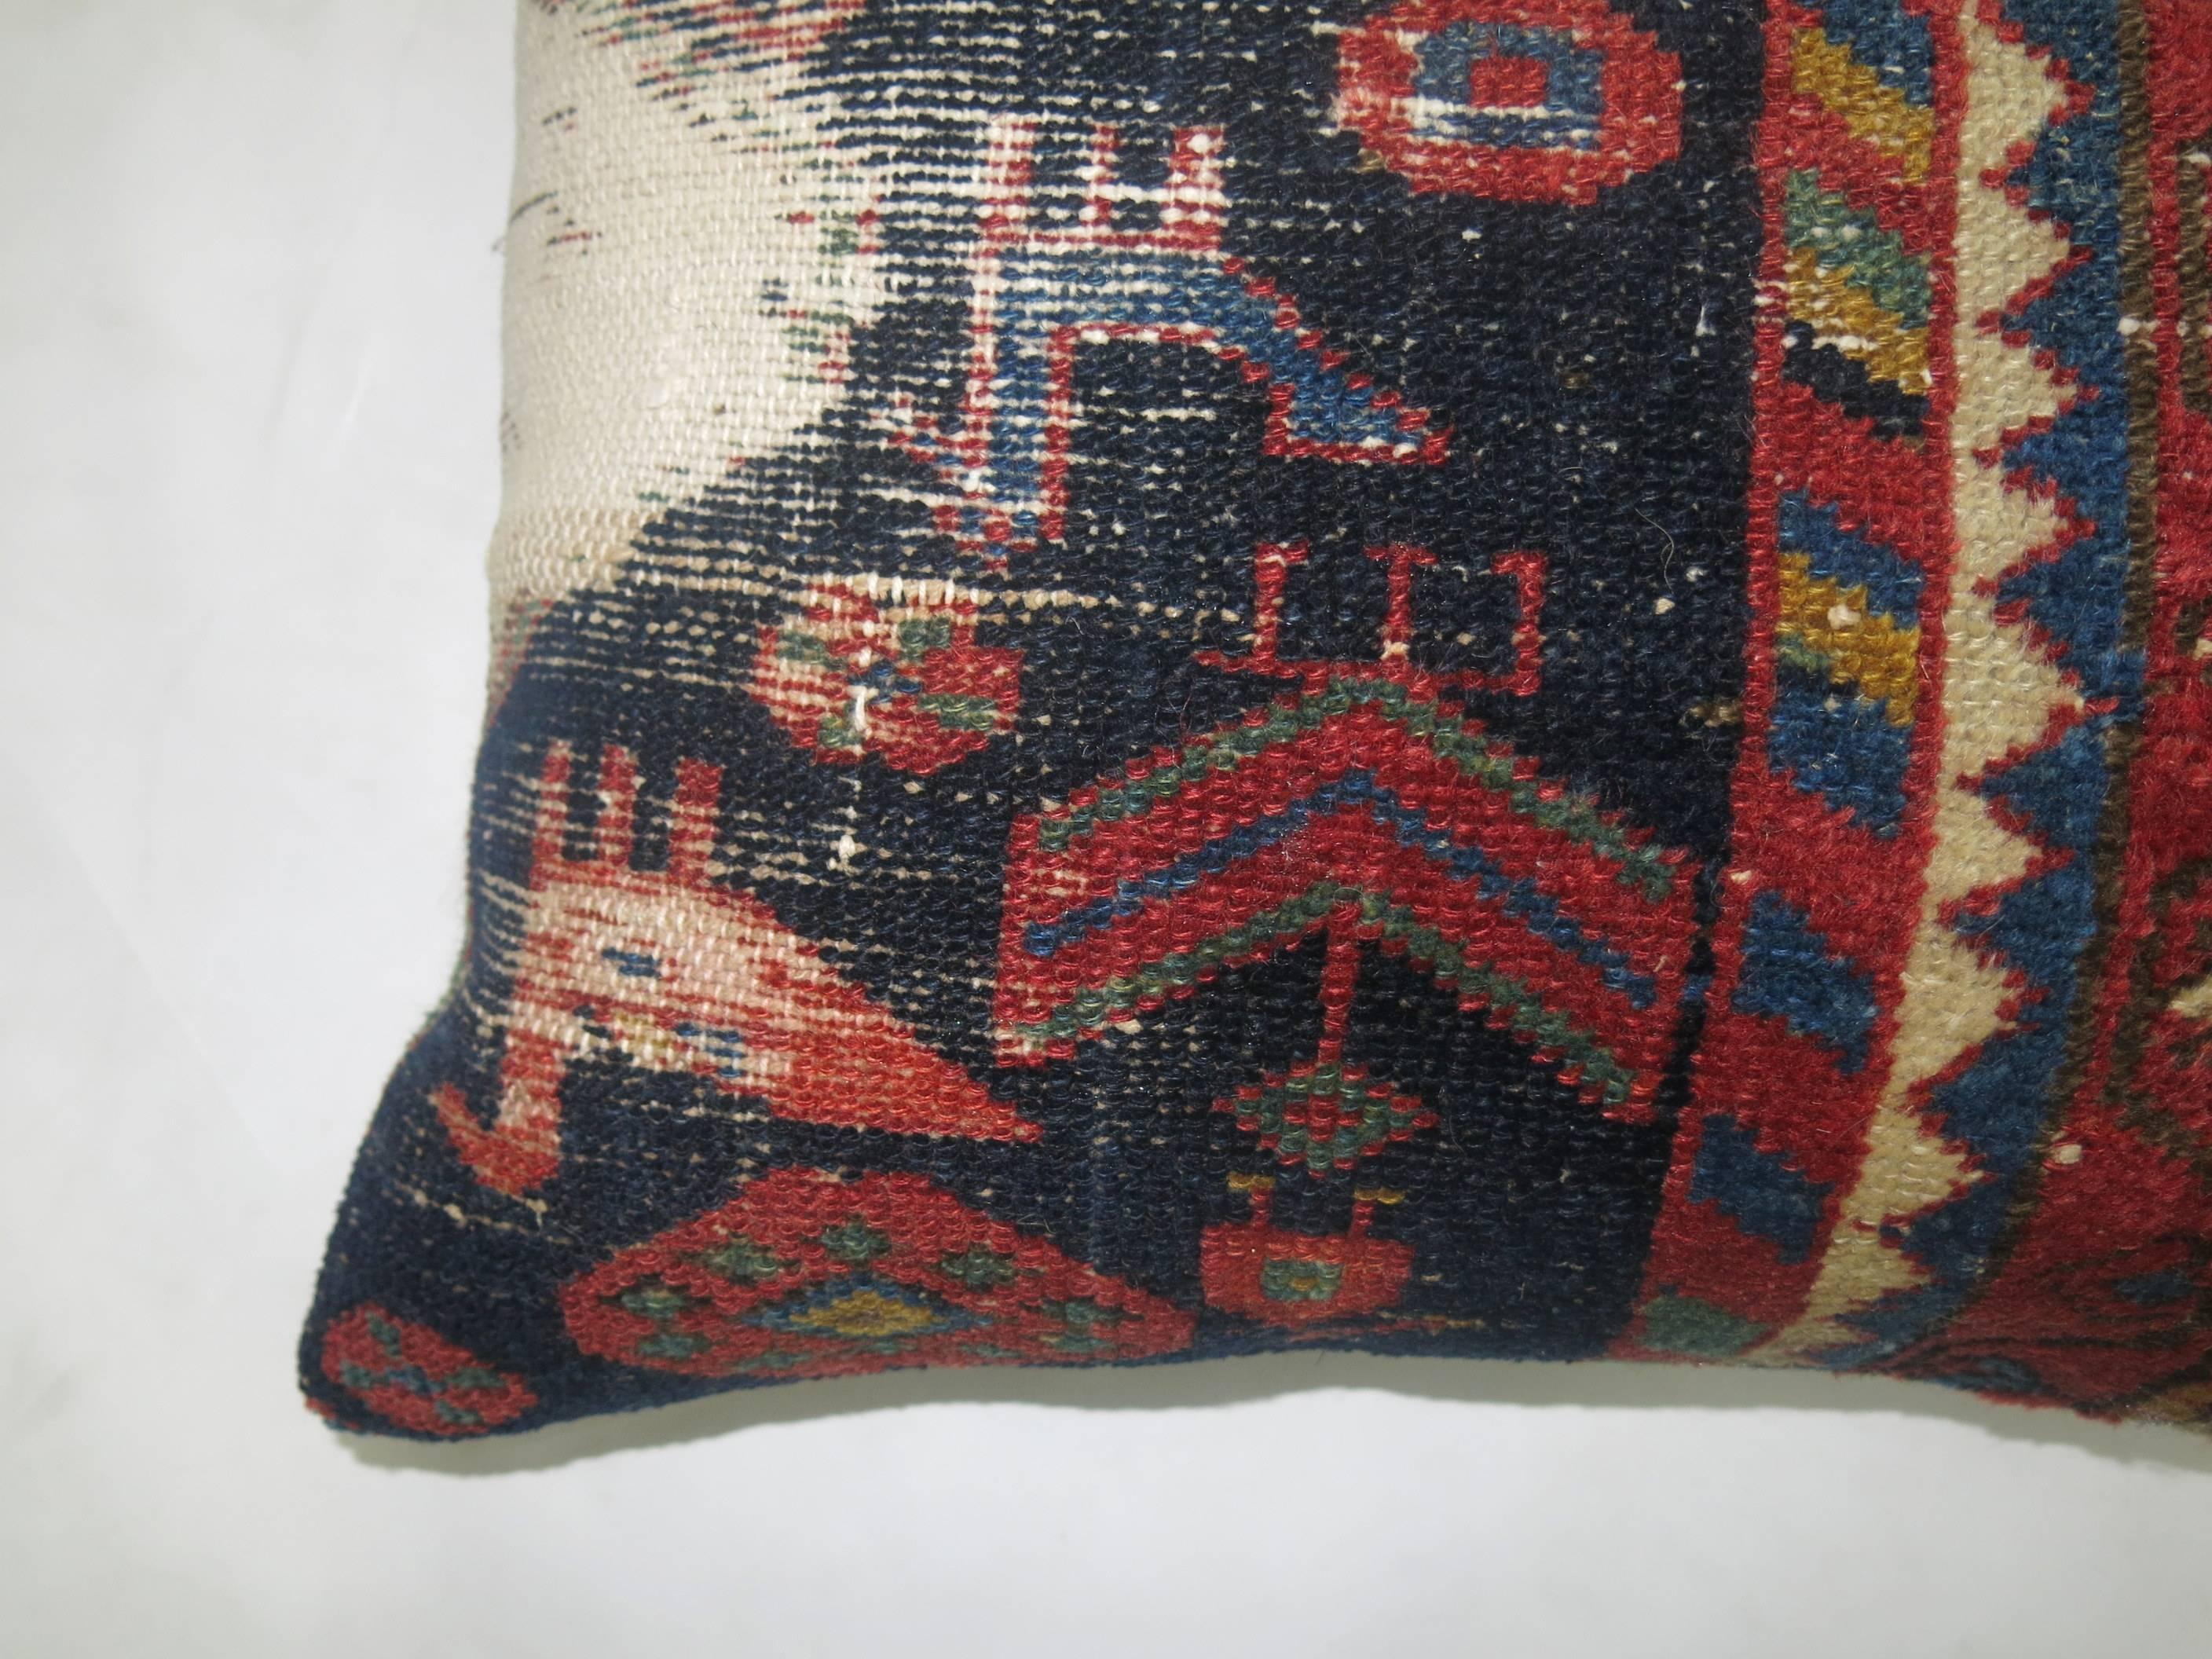 Shabby Chic Persian pillow in blues, orangy red.

16'' x 23''